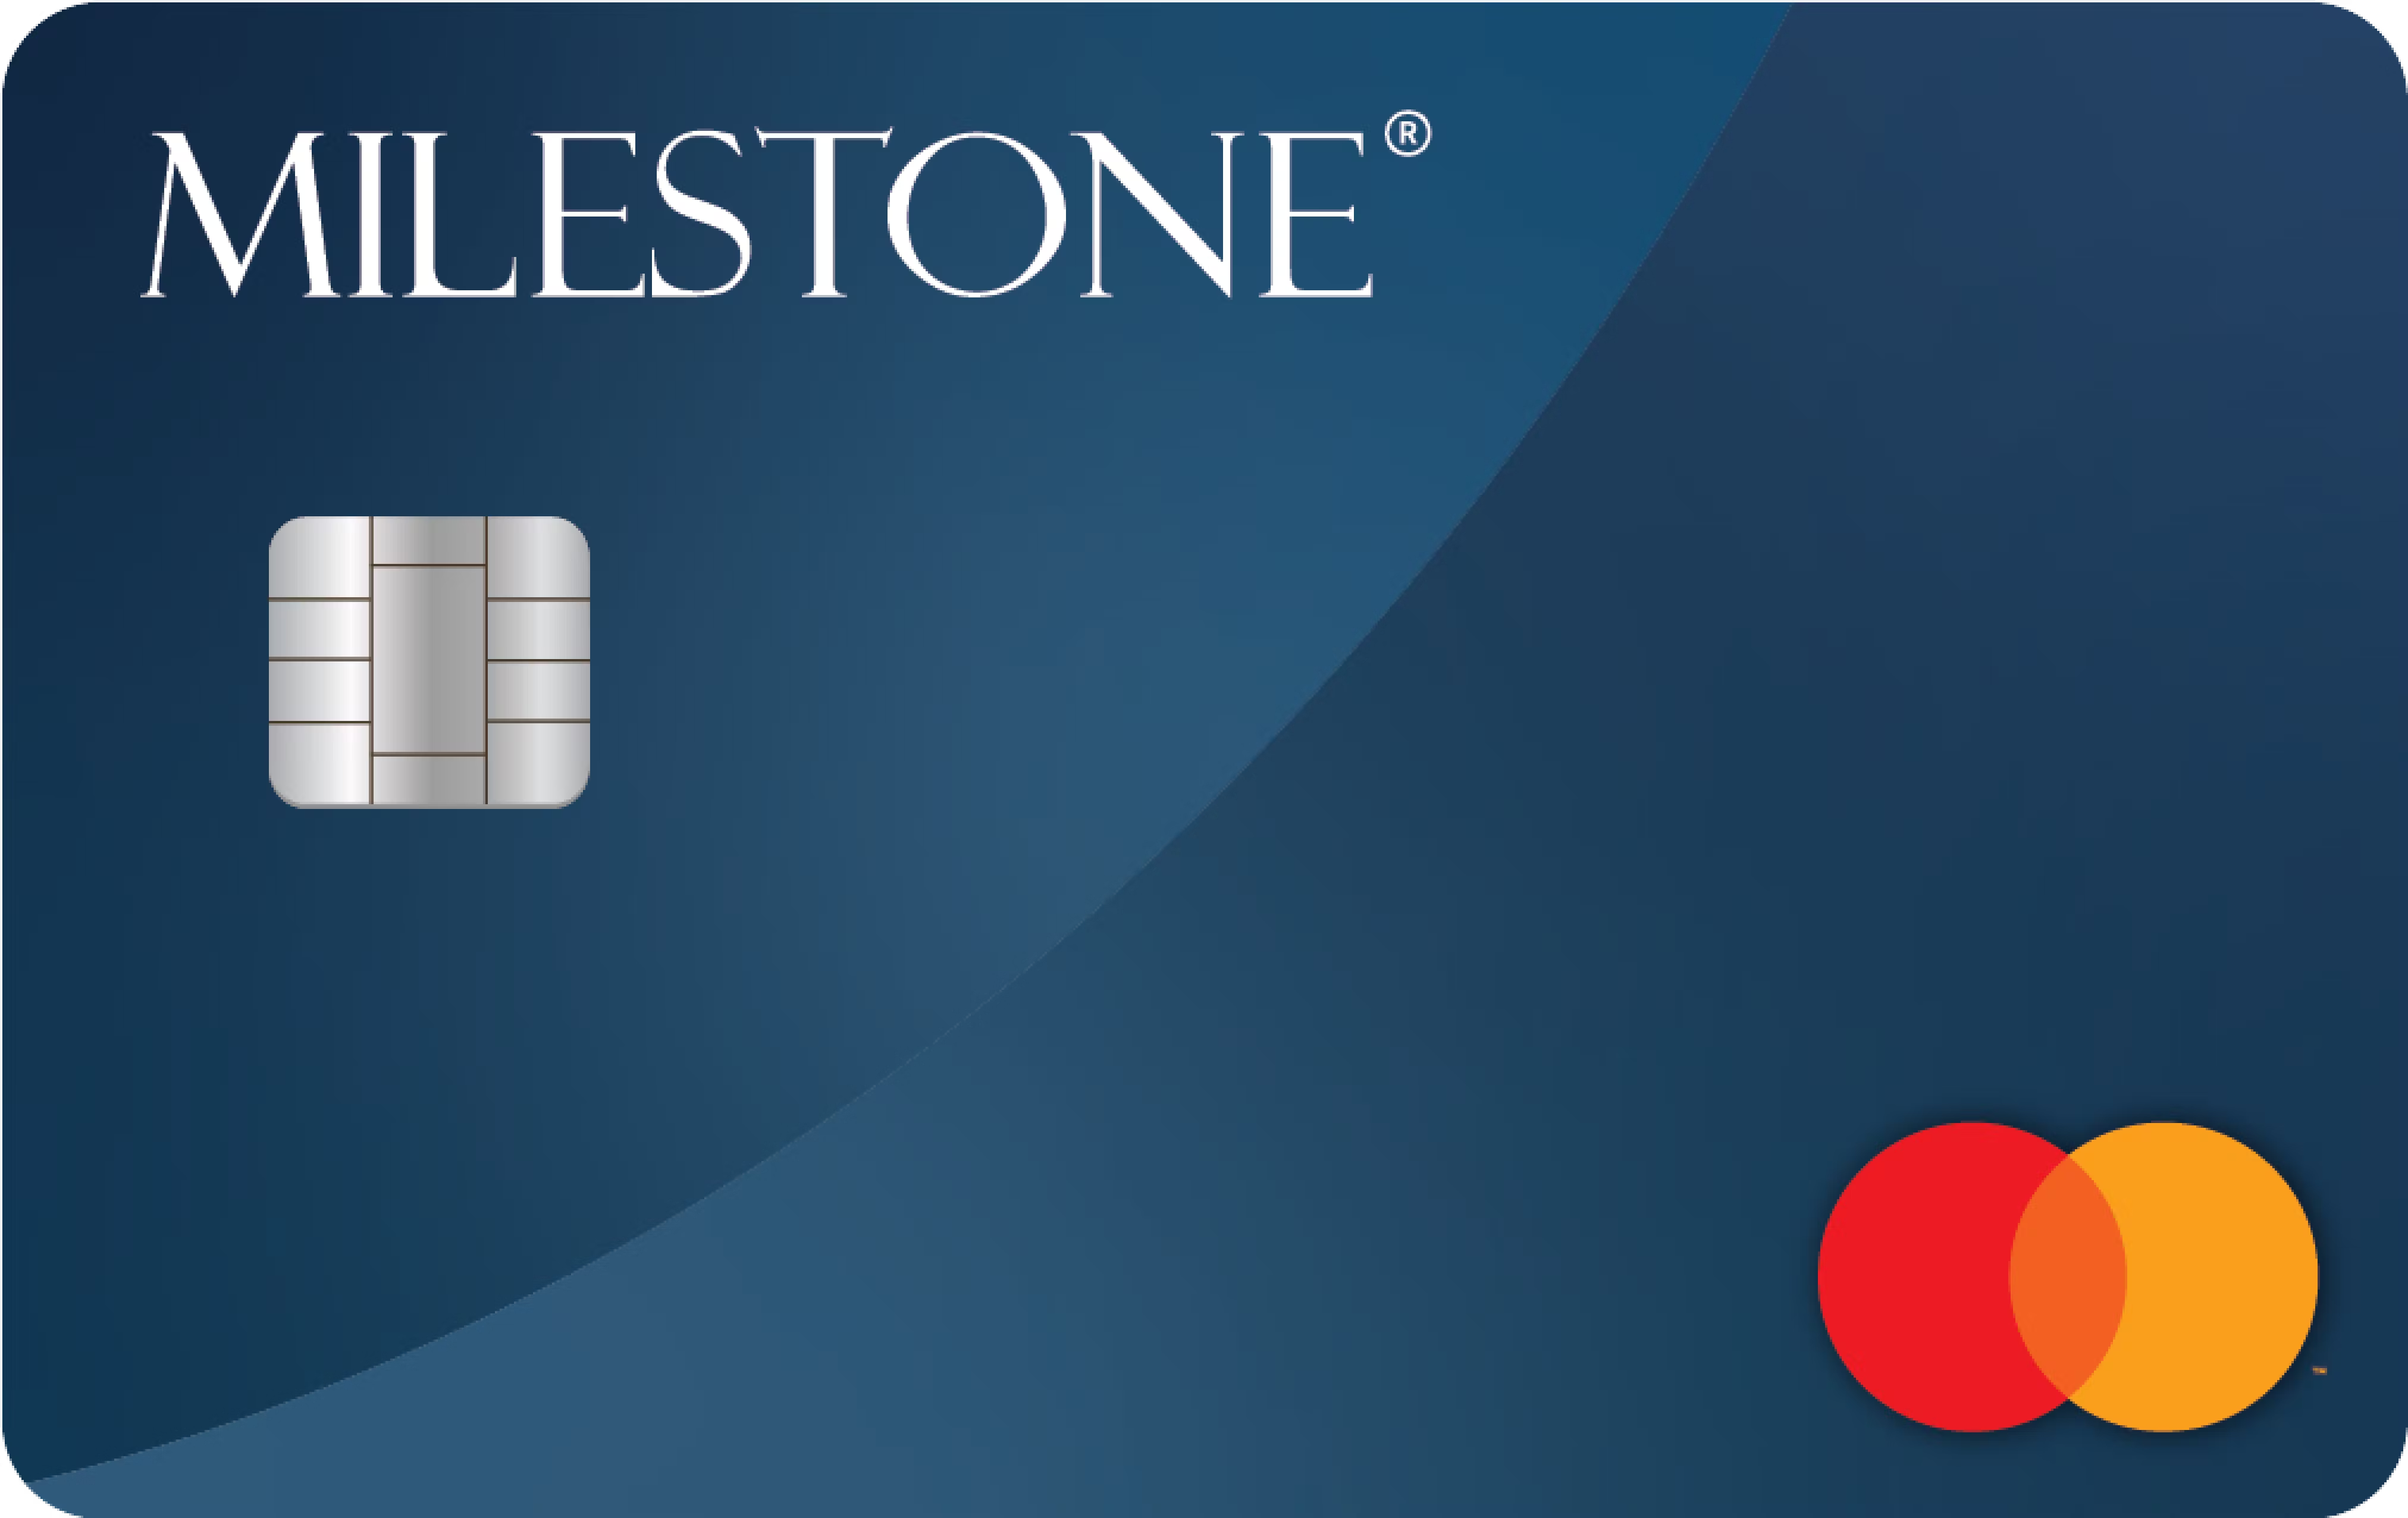 How to apply for the Milestone Mastercard credit card?